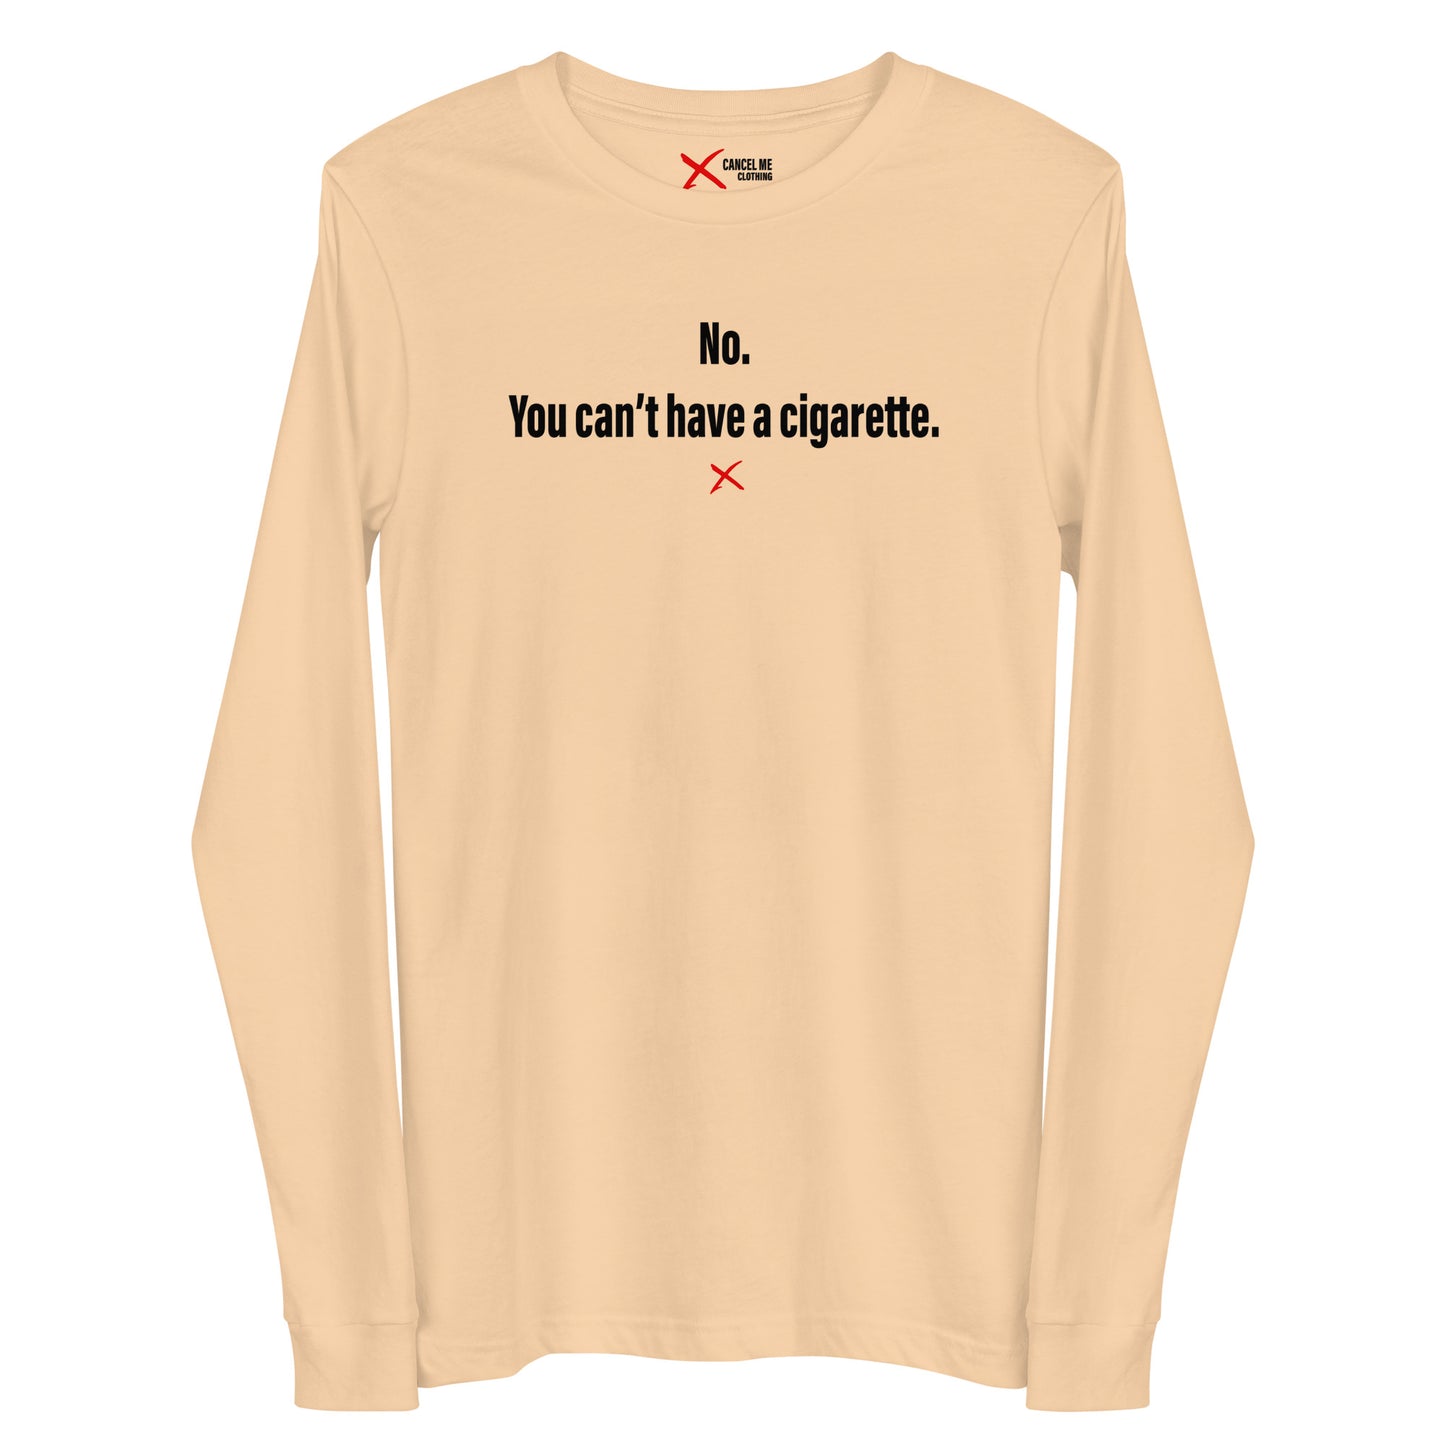 No. You can't have a cigarette. - Longsleeve